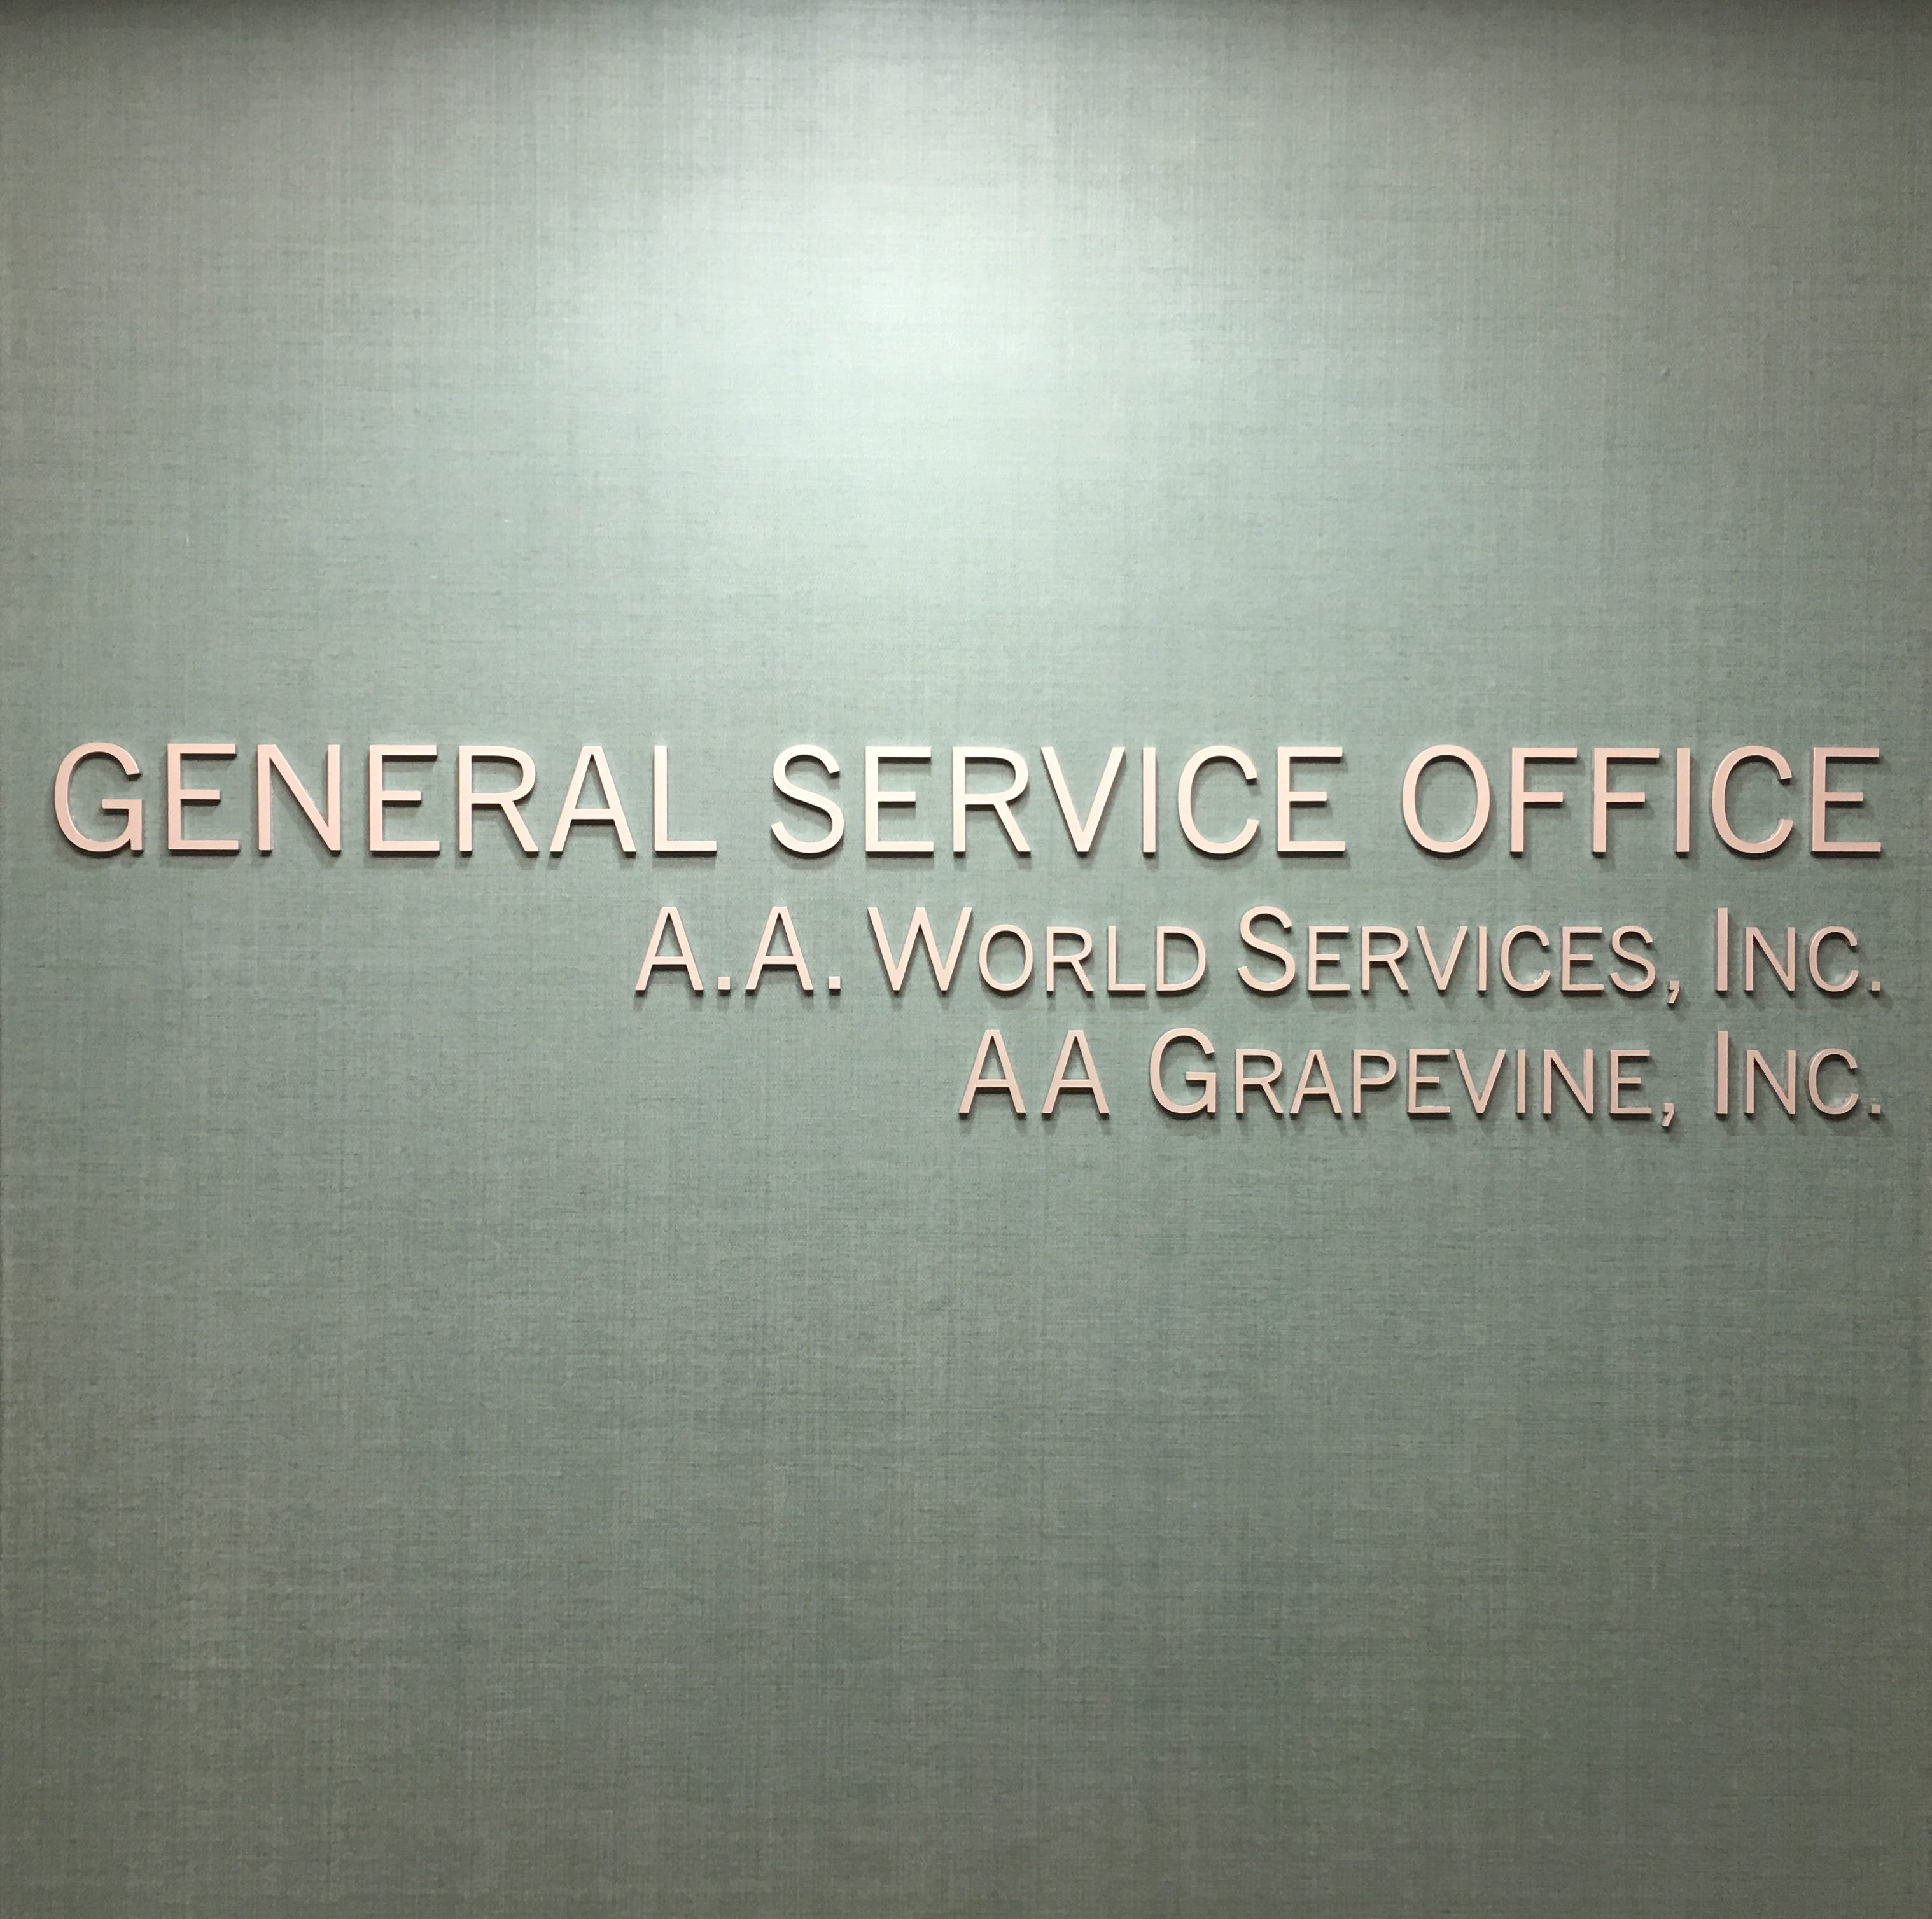 IMG_1383_General Service Office_Front_CROPPED_2 copy